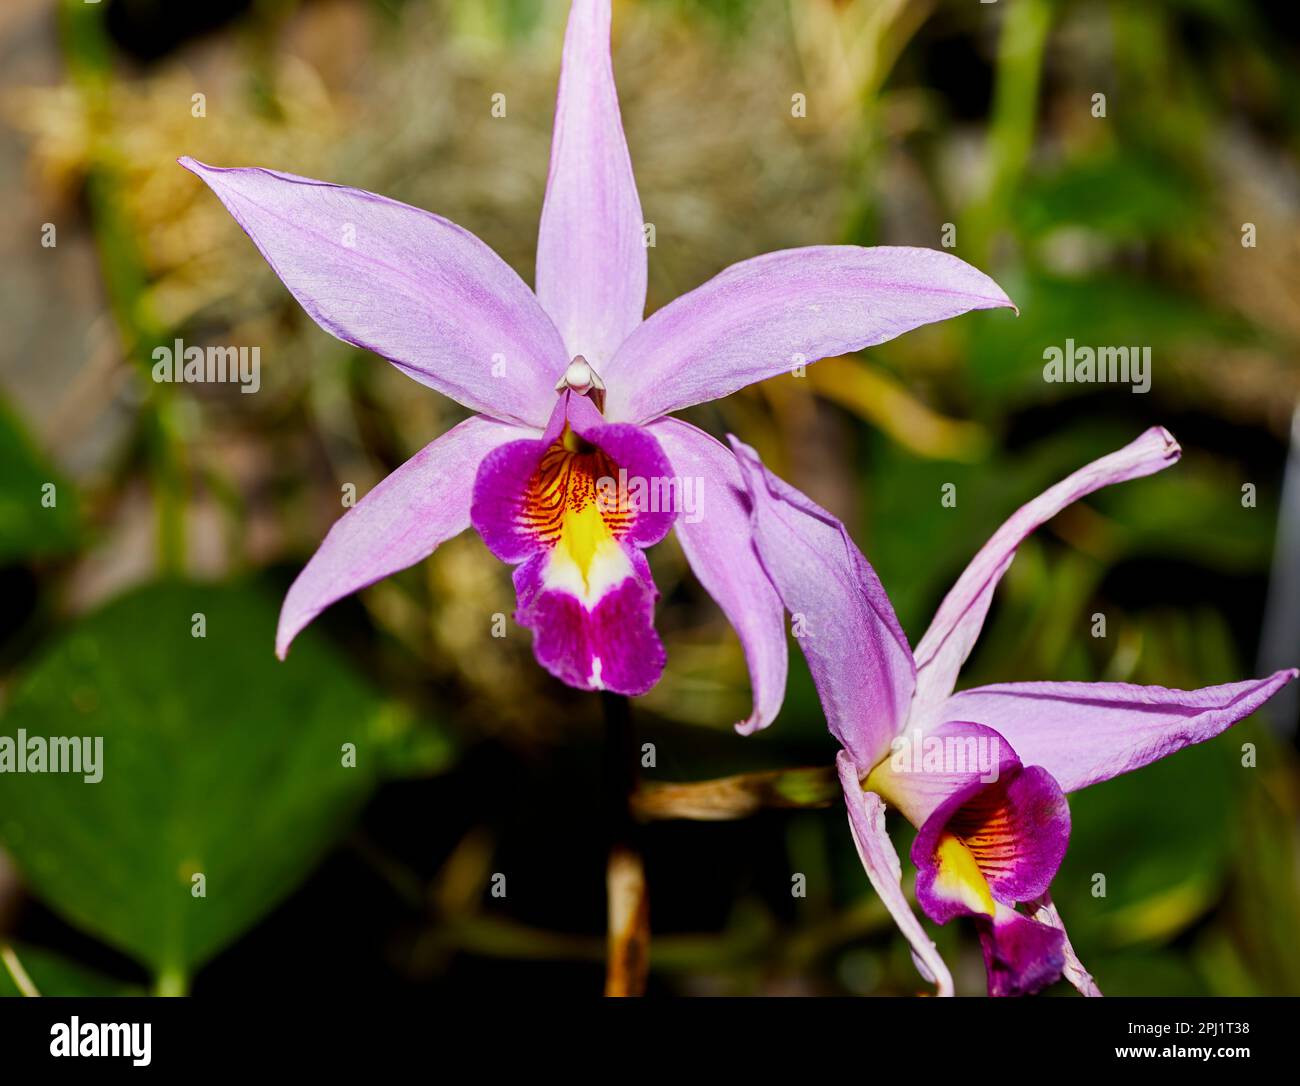 Close up of a Lavendar Laelia Orchid Flower Stock Photo